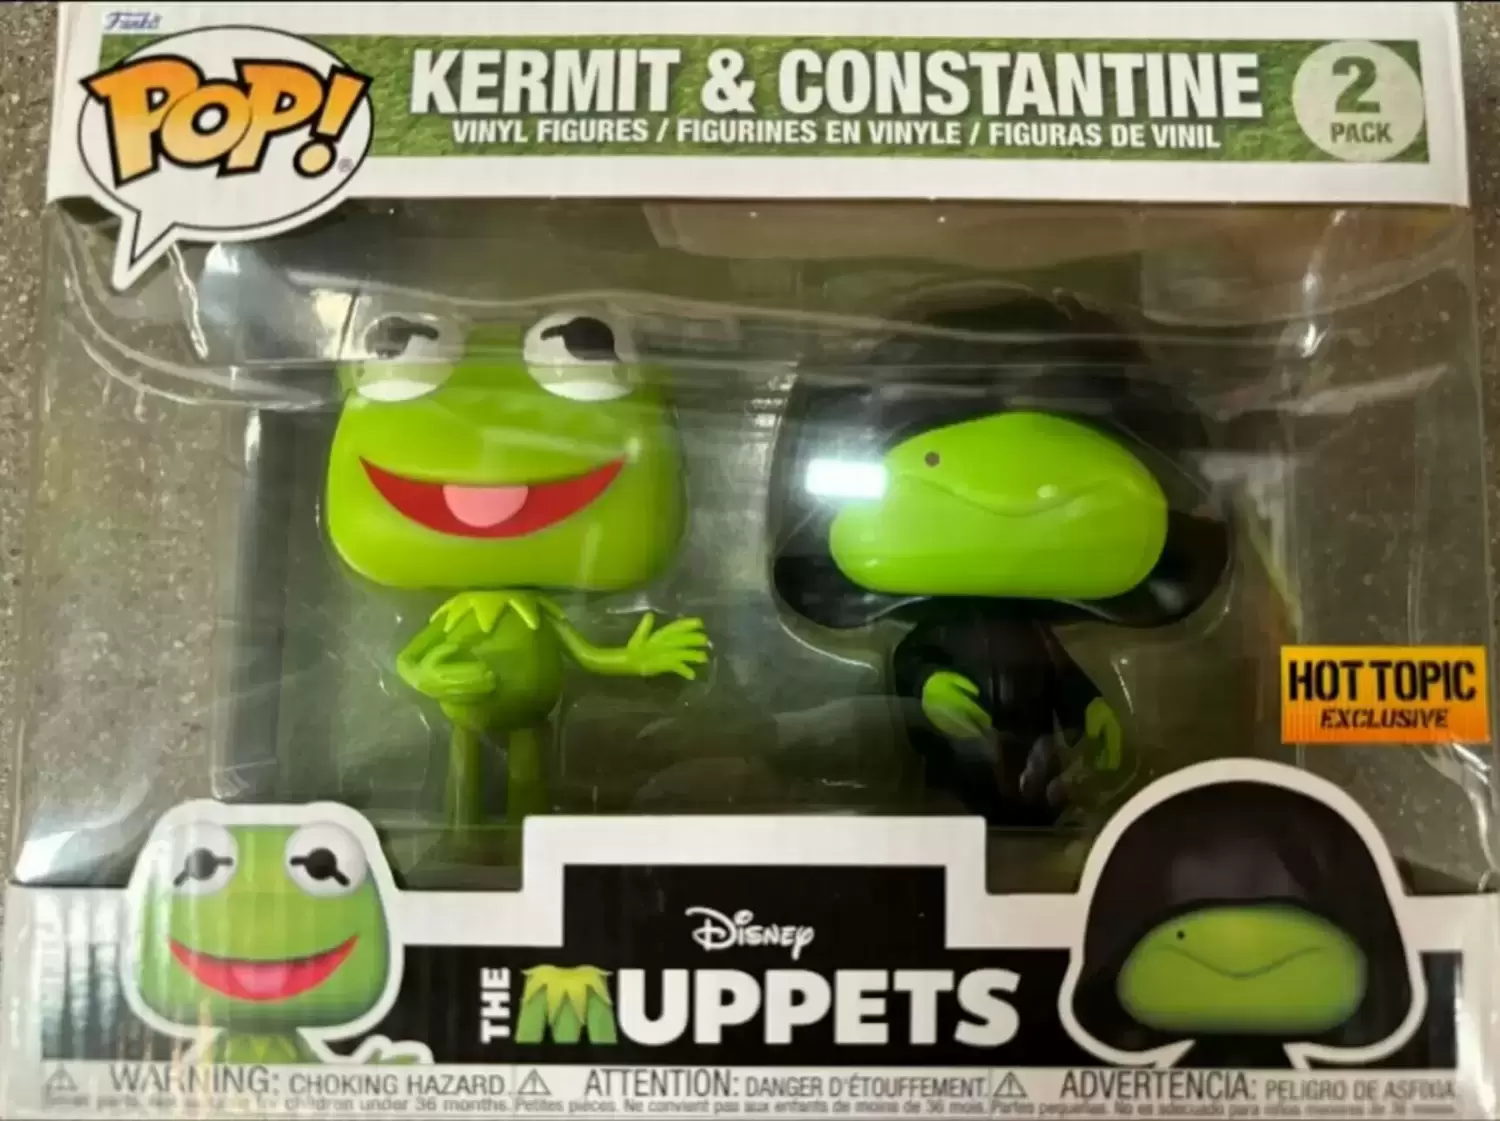 POP! Muppets - The Muppets - Kermit & Constantine 2 Pack